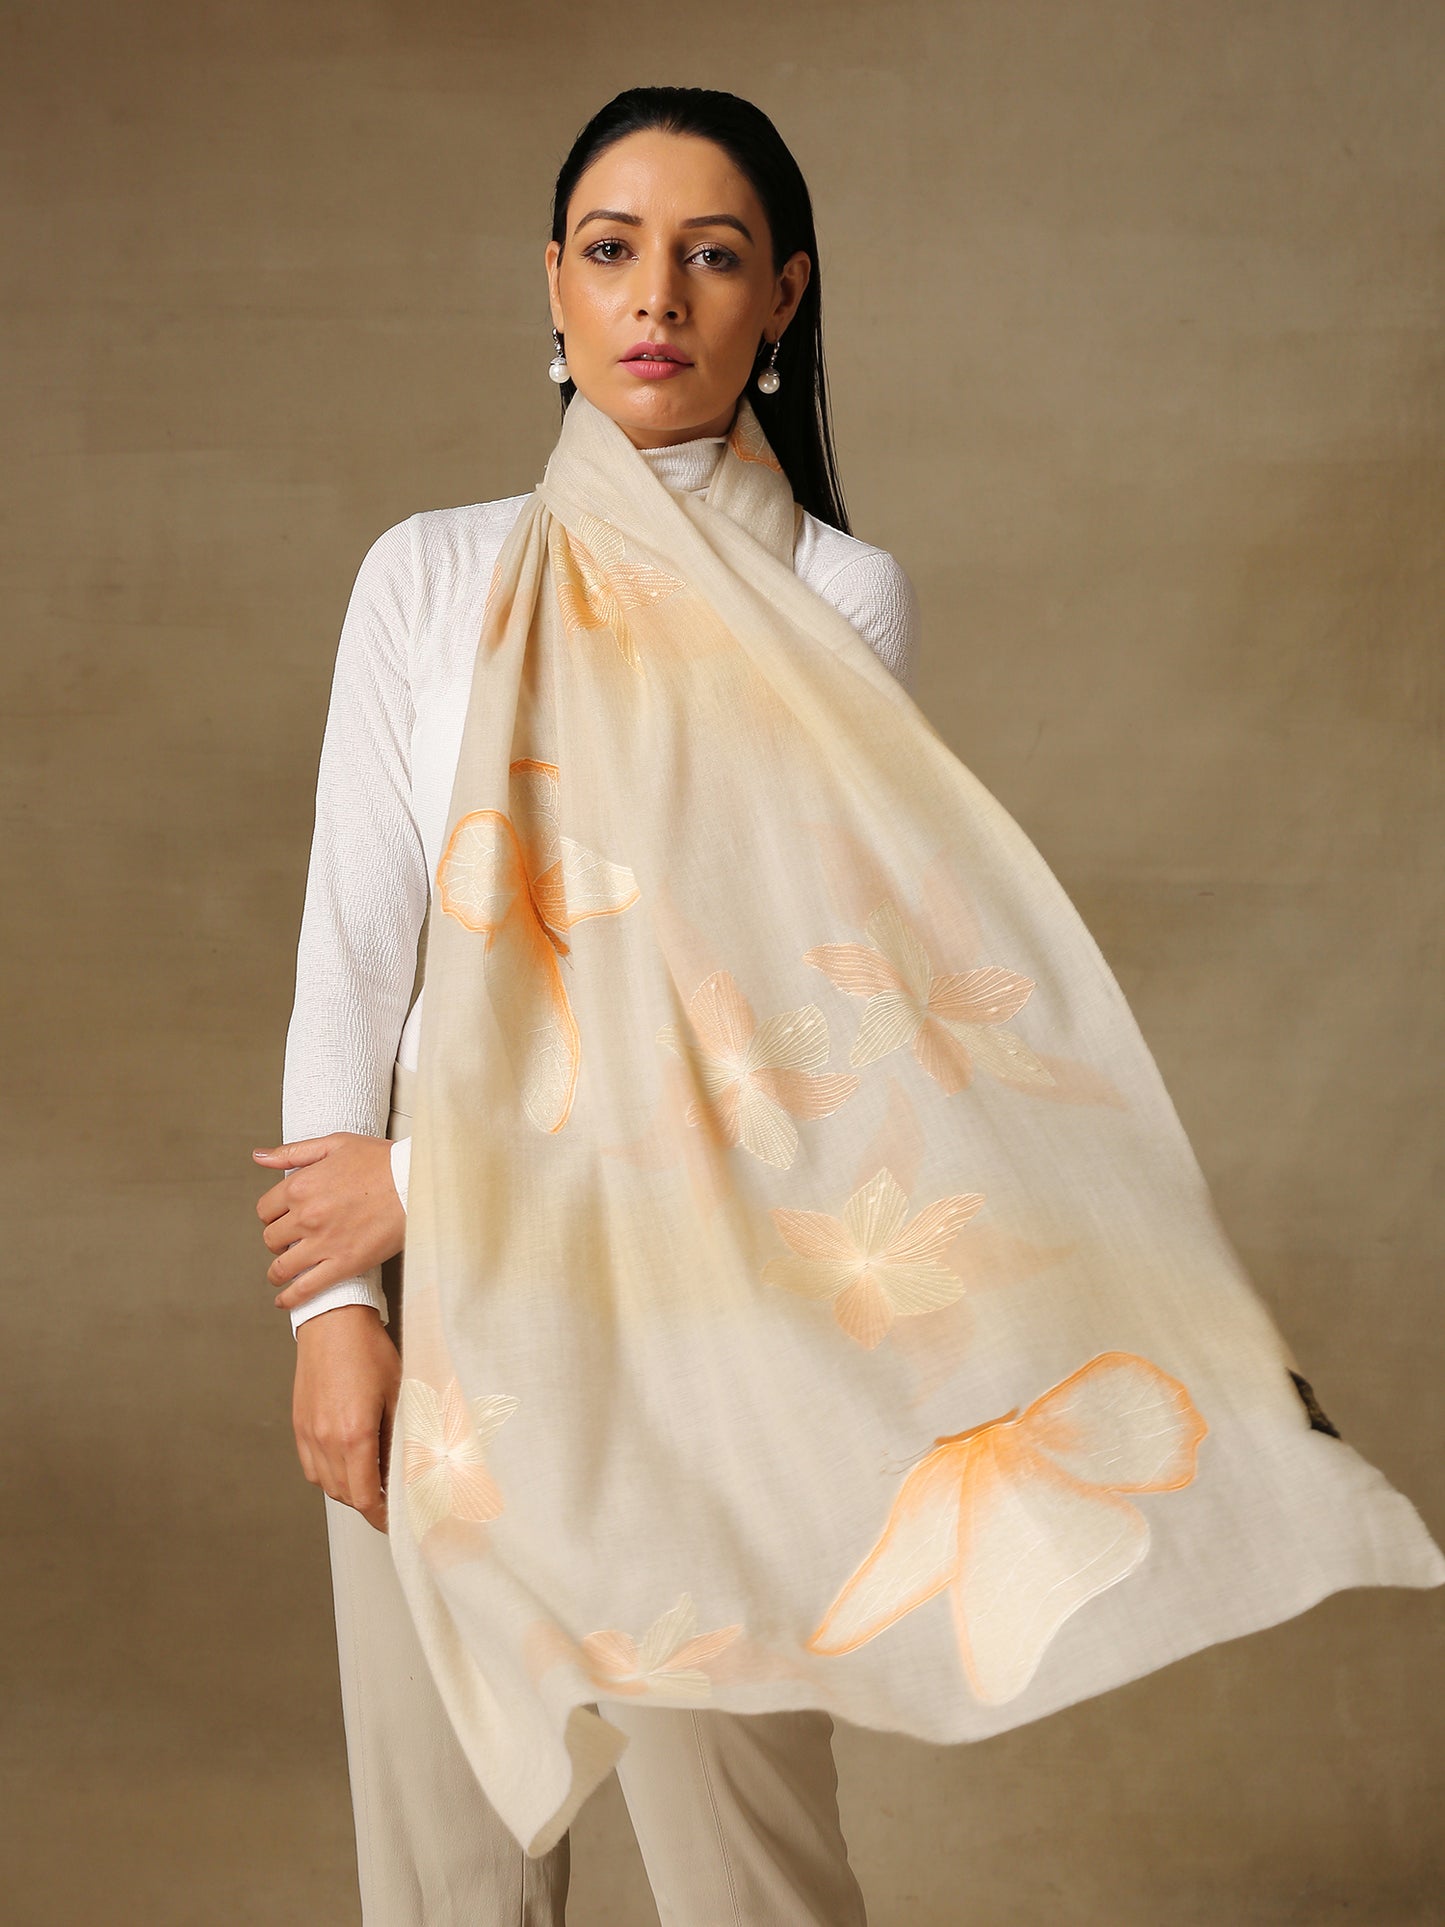 Model is wearing the butterfly pashmina stole from Shaza, featuring hand embroidered butterfly shapes decorated with swarovski on a cream pashmina stole. 